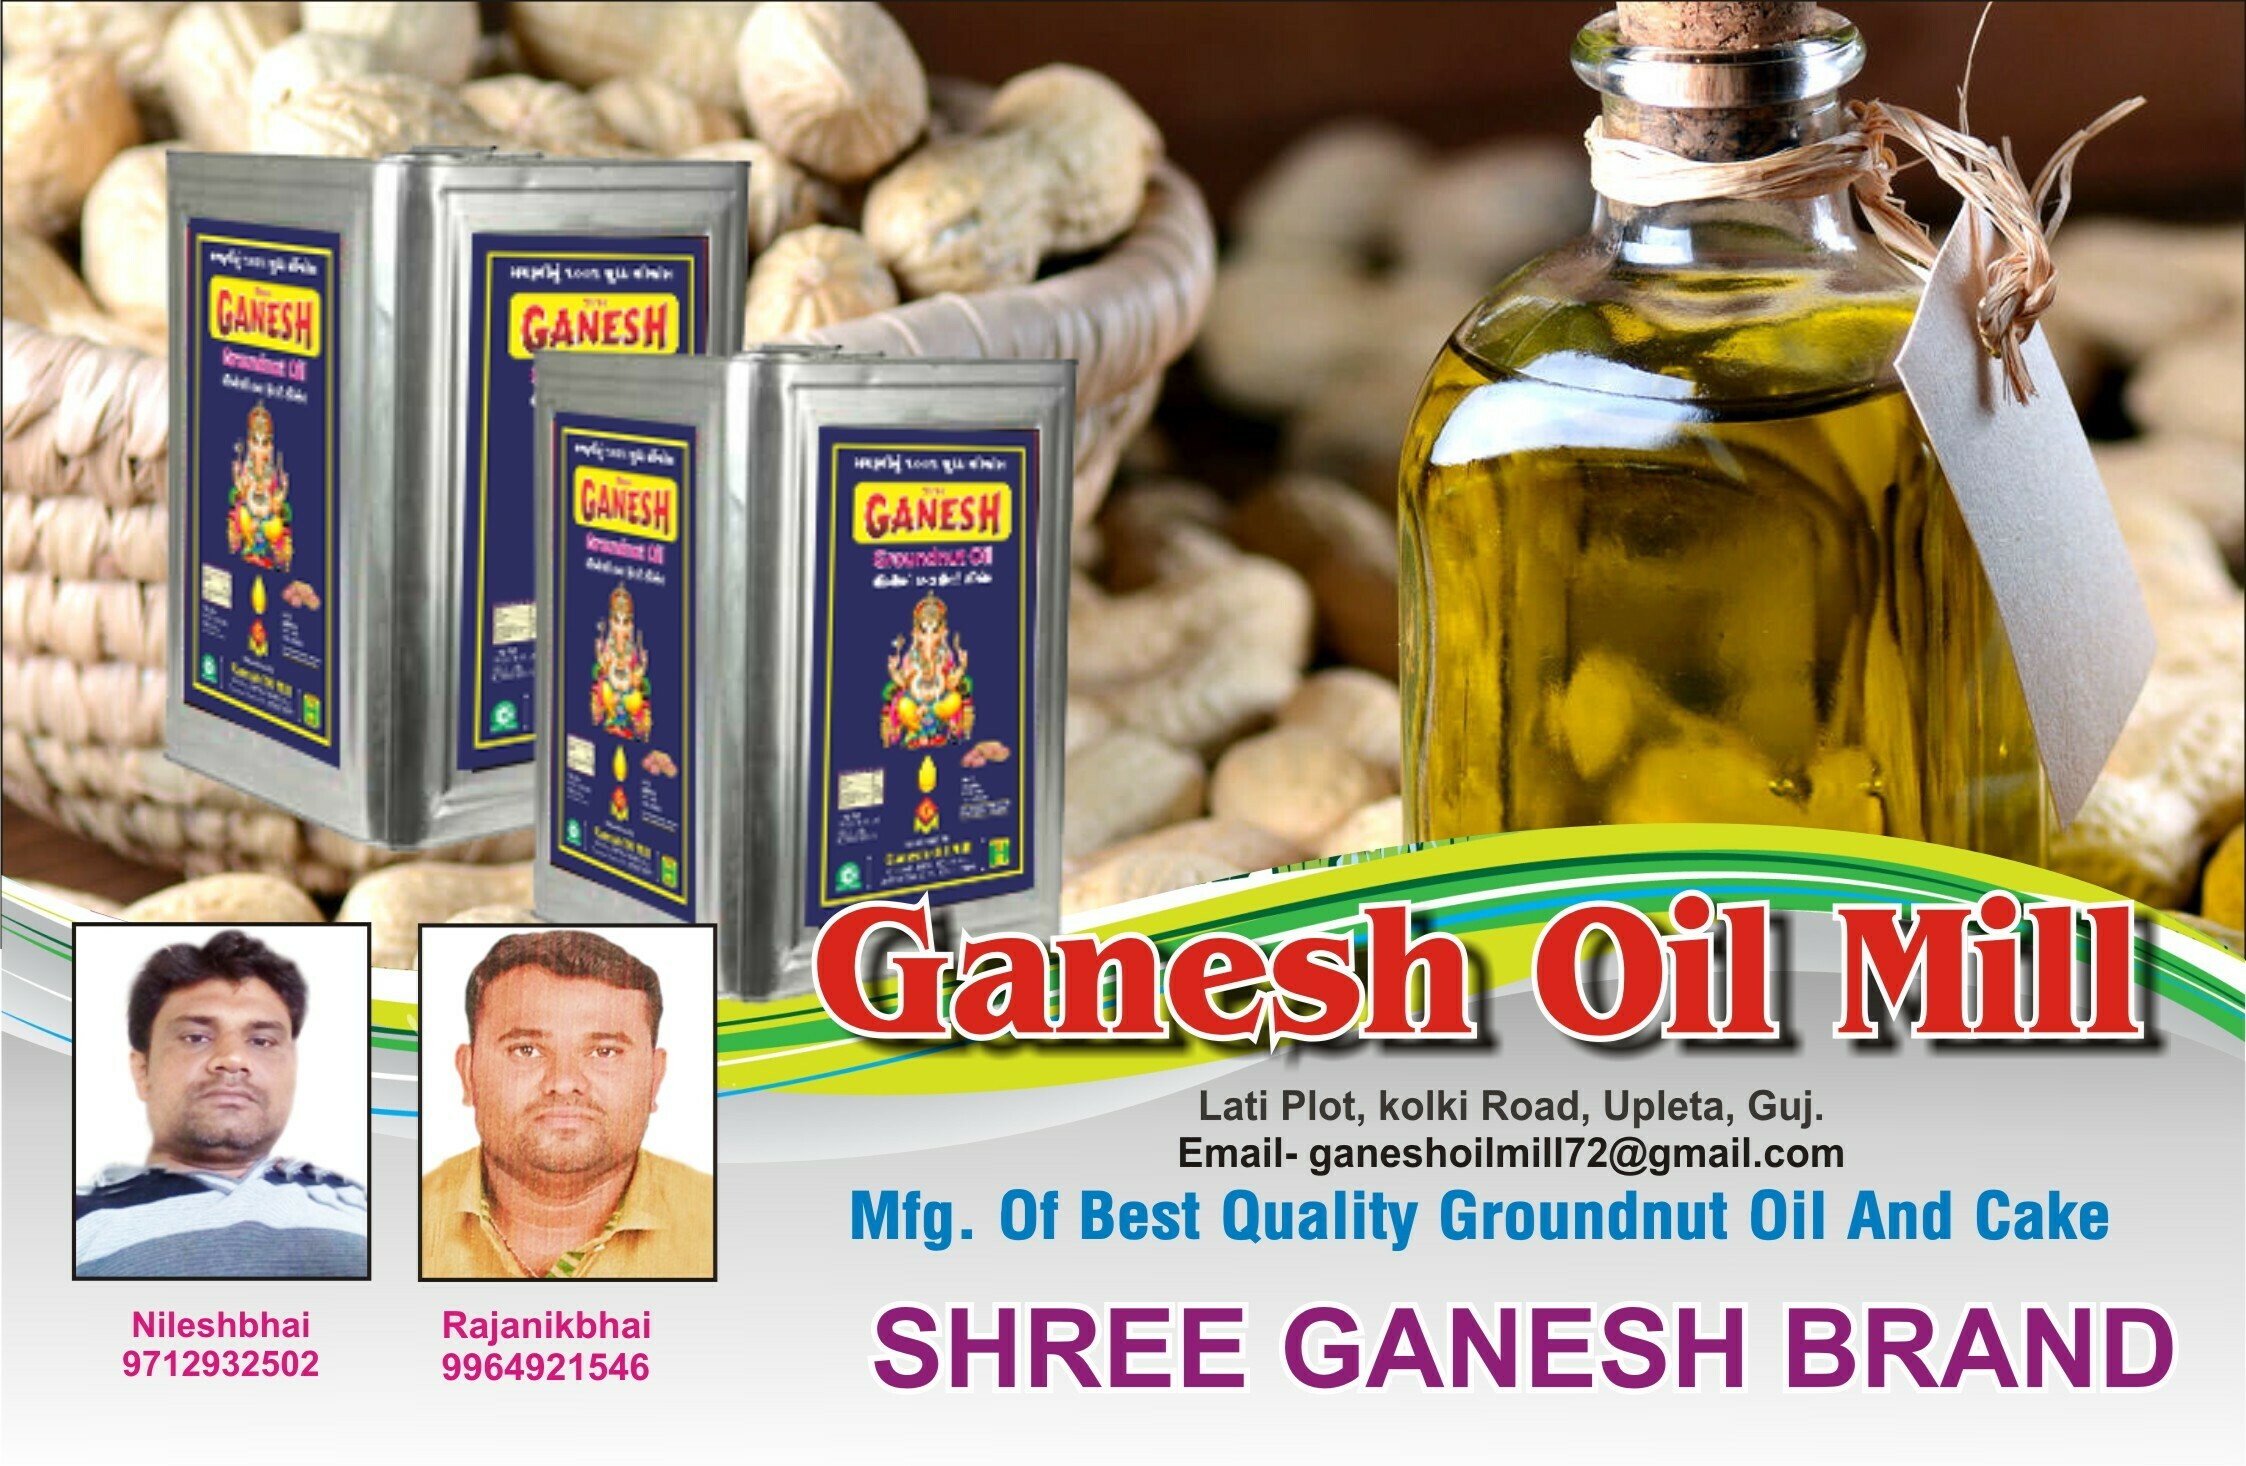 Ganesh Oil Mill - Manufacturers Of Groundnut Oil And Cake